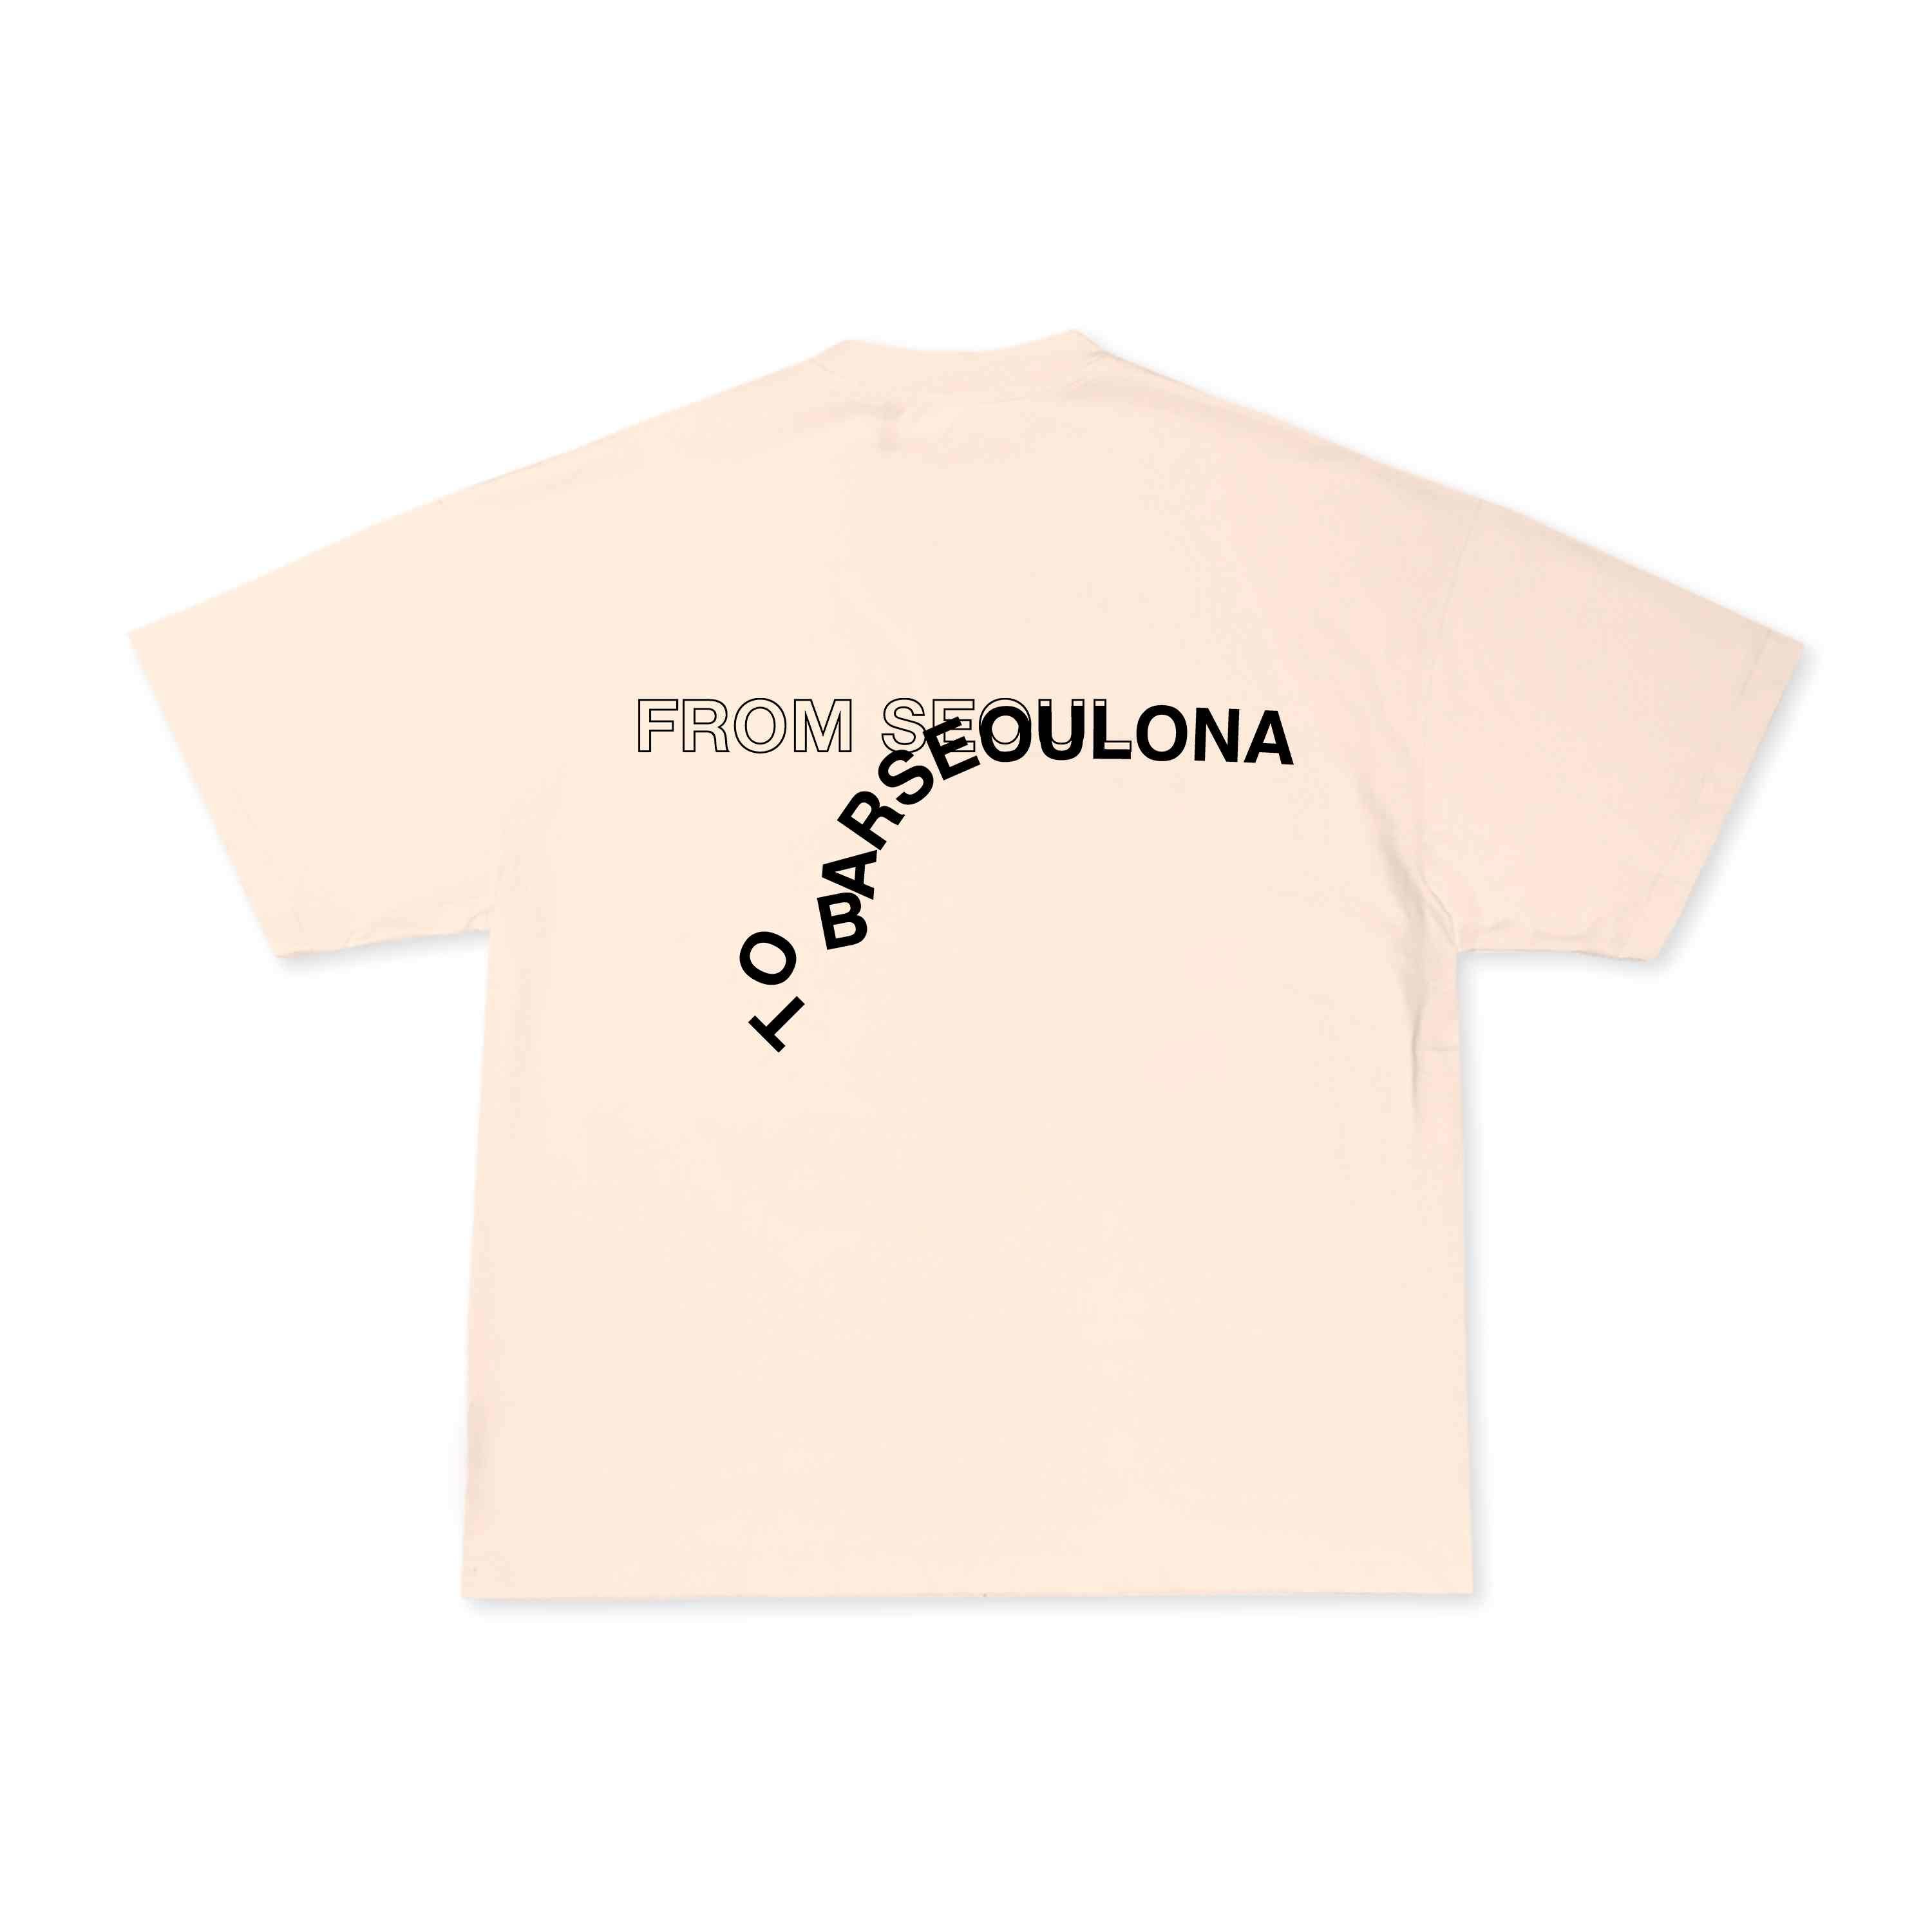 FROM SEOUL TO BCN TEE